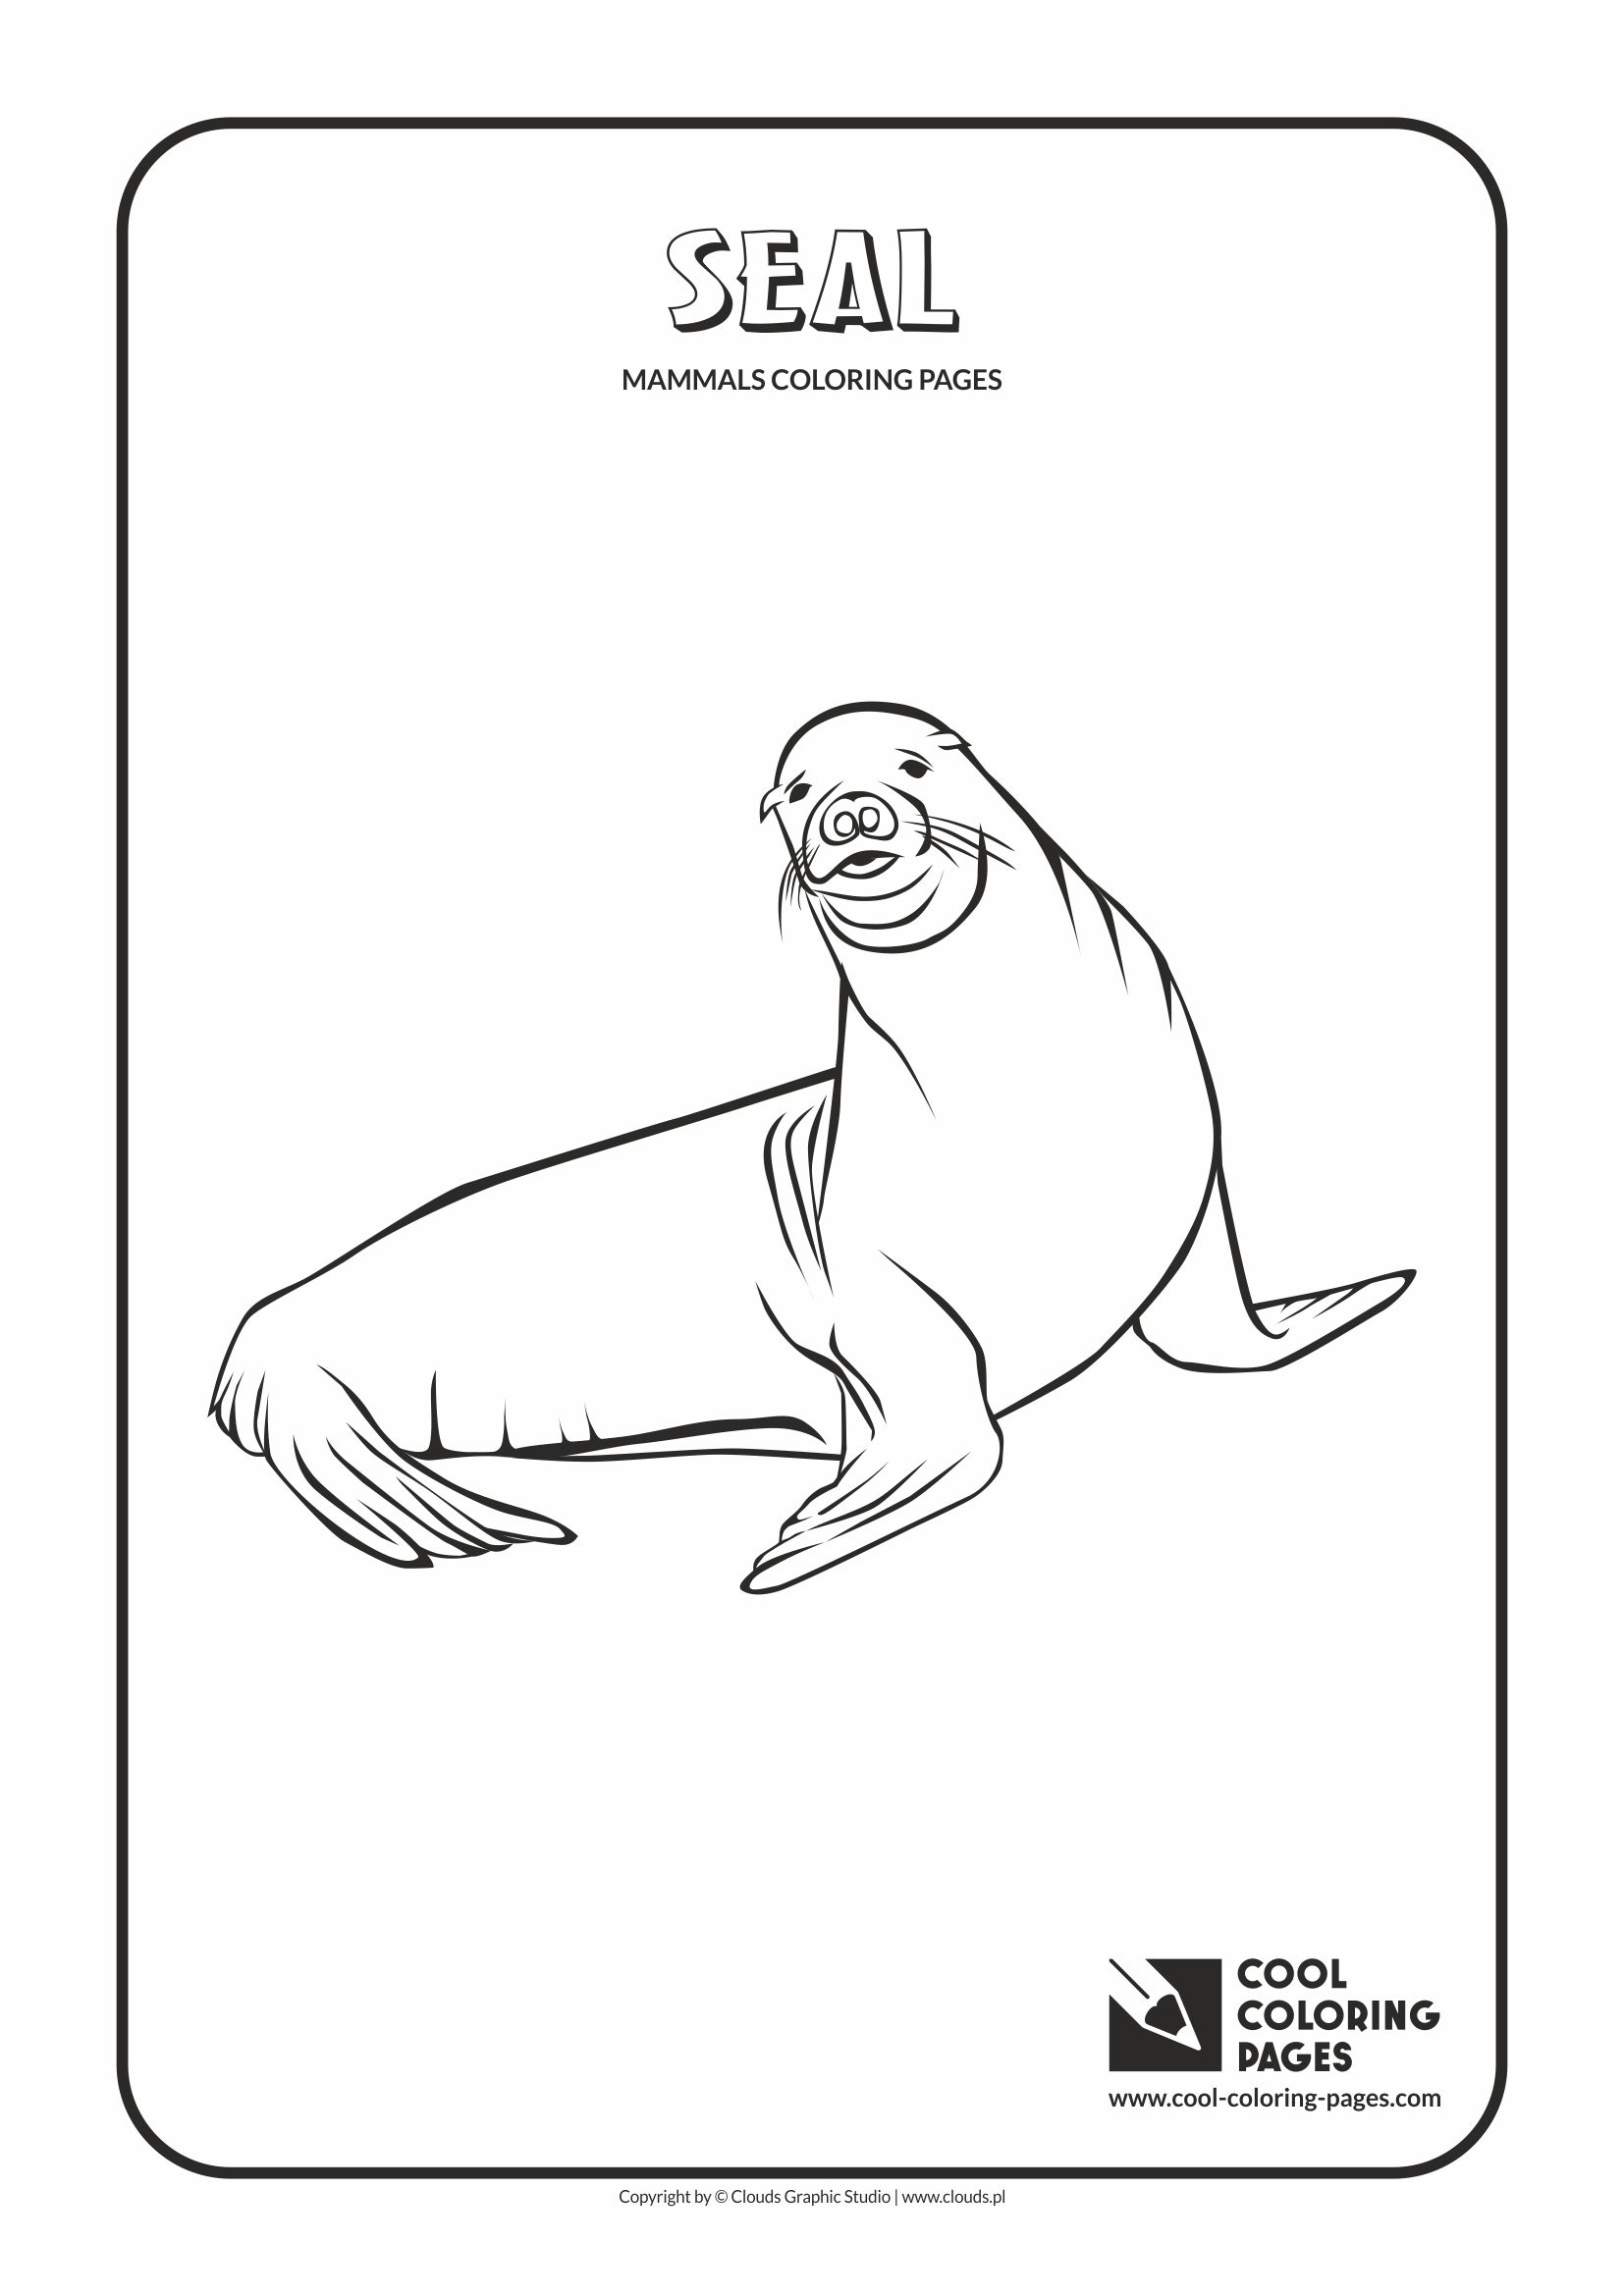 Cool Coloring Pages Animals coloring pages Cool Coloring